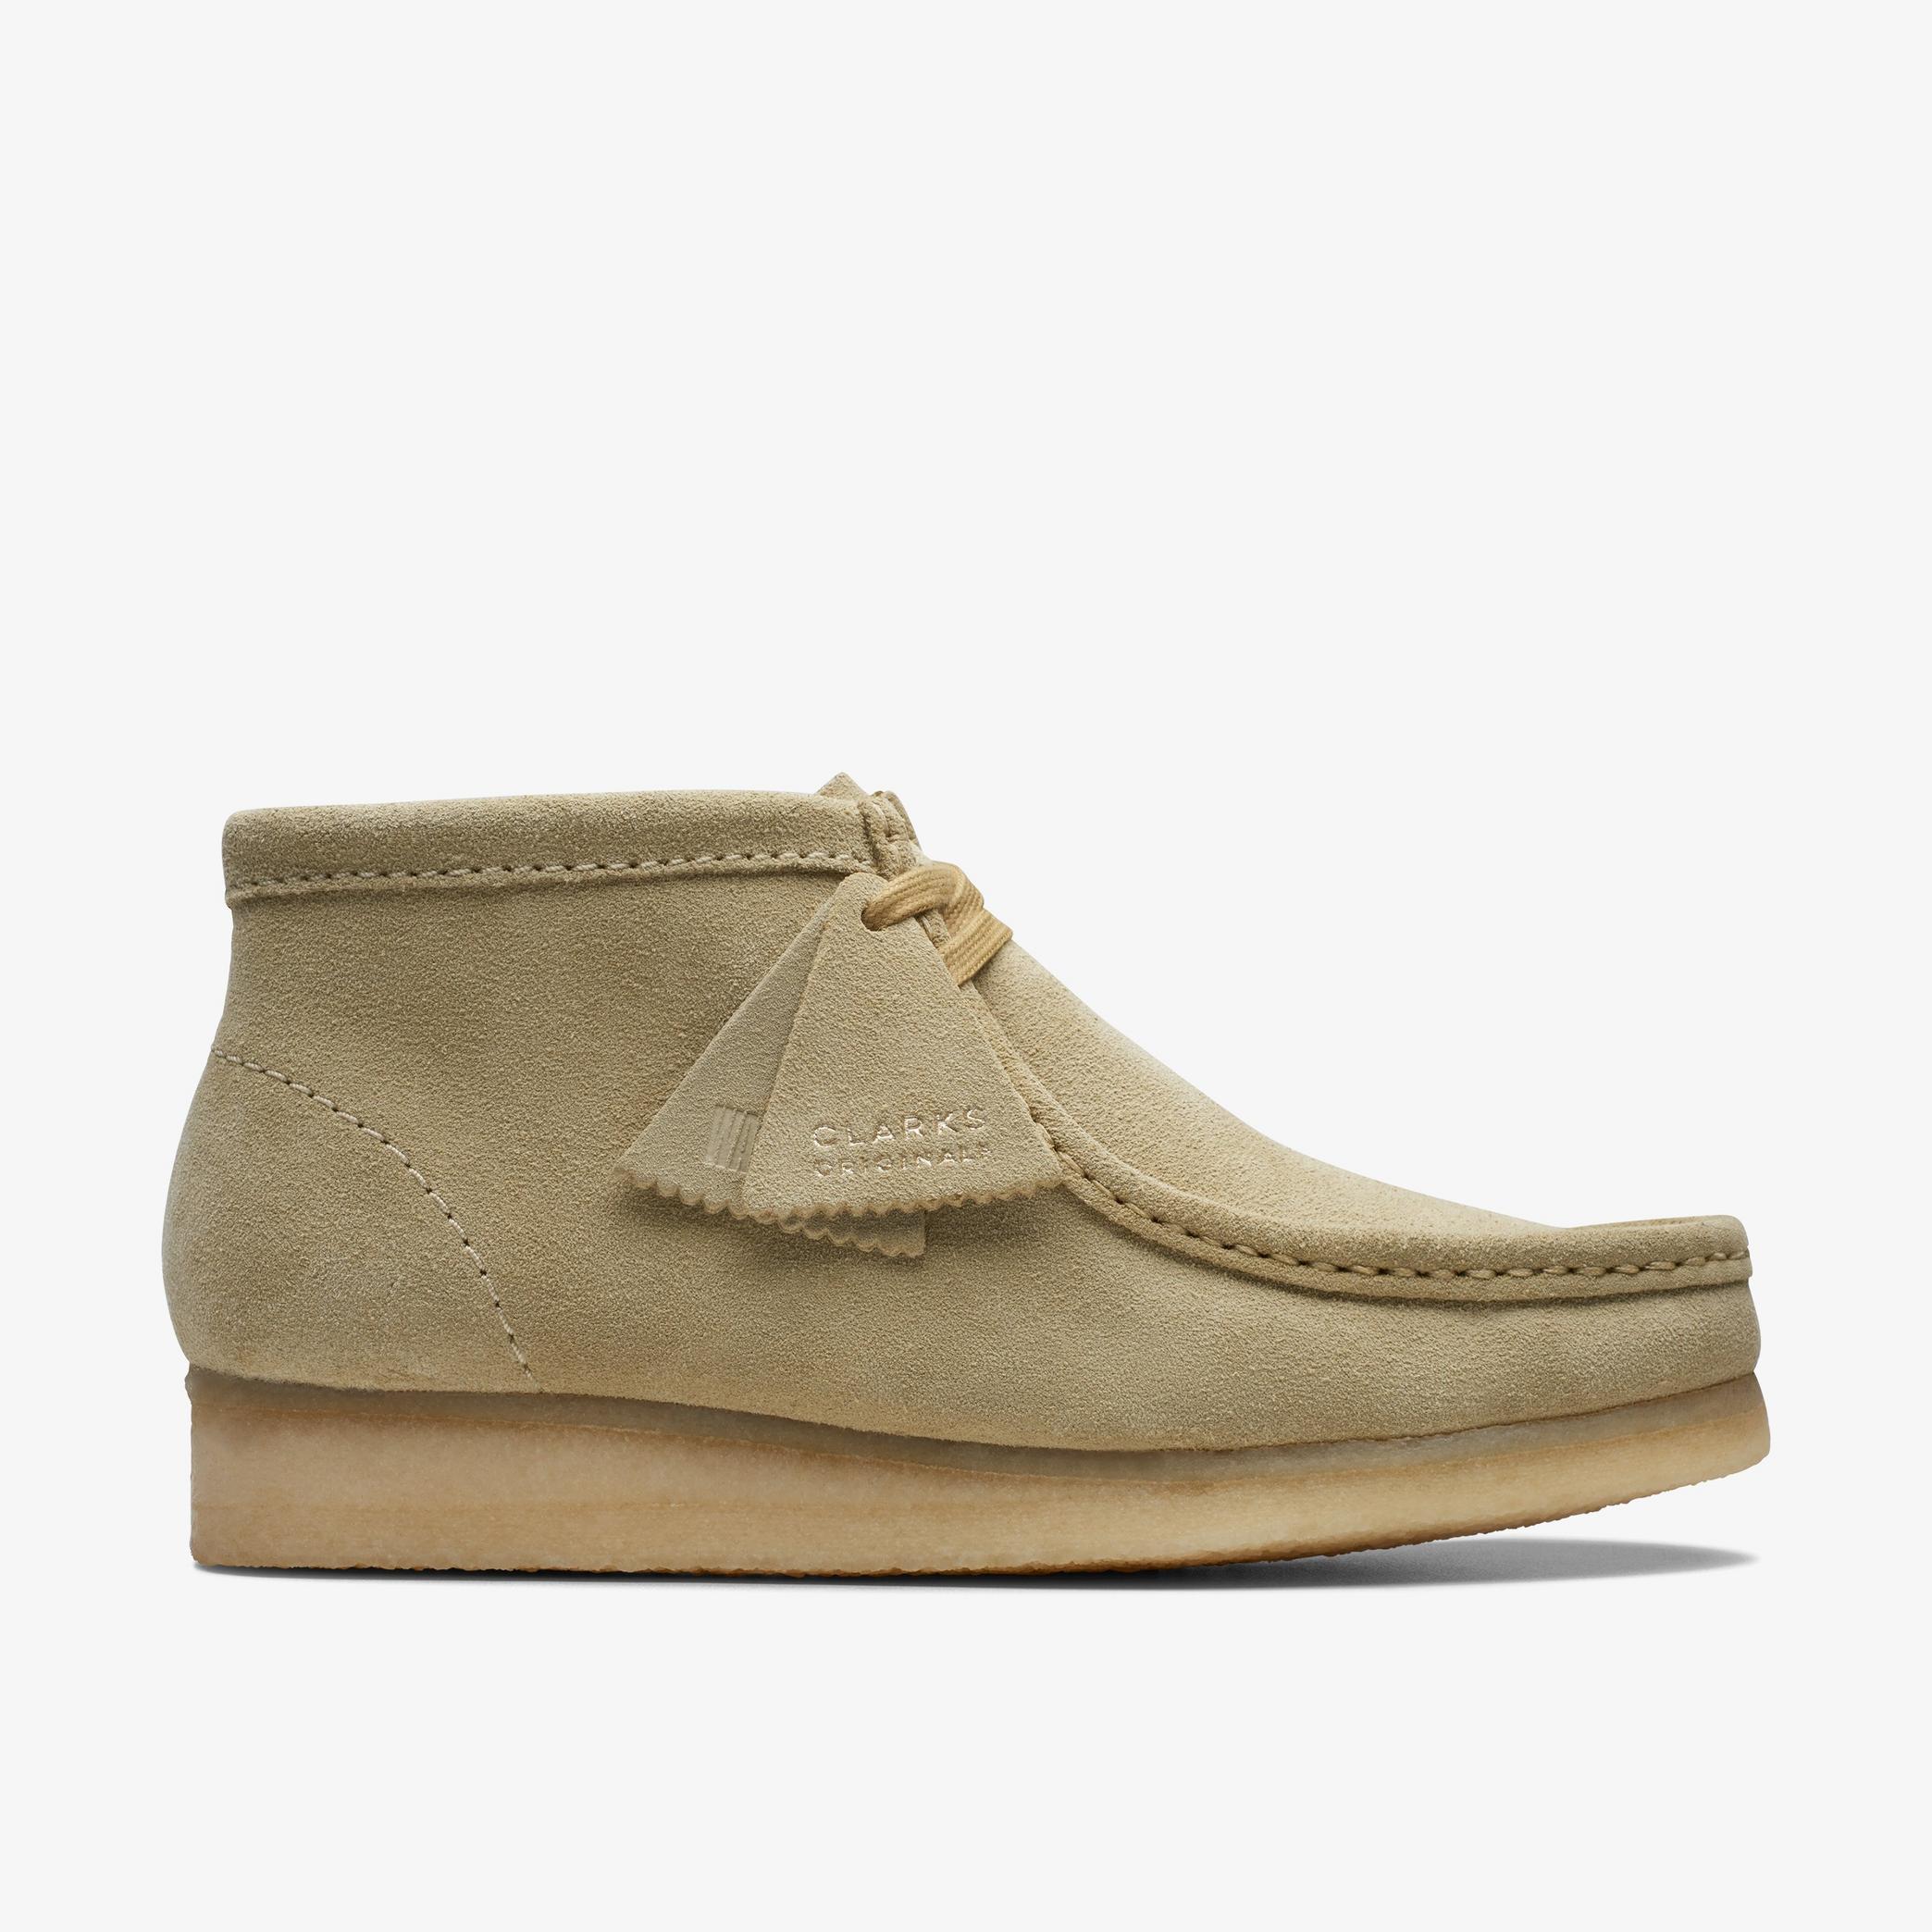 Wallabee Boot Maple Suede Boots, view 1 of 7